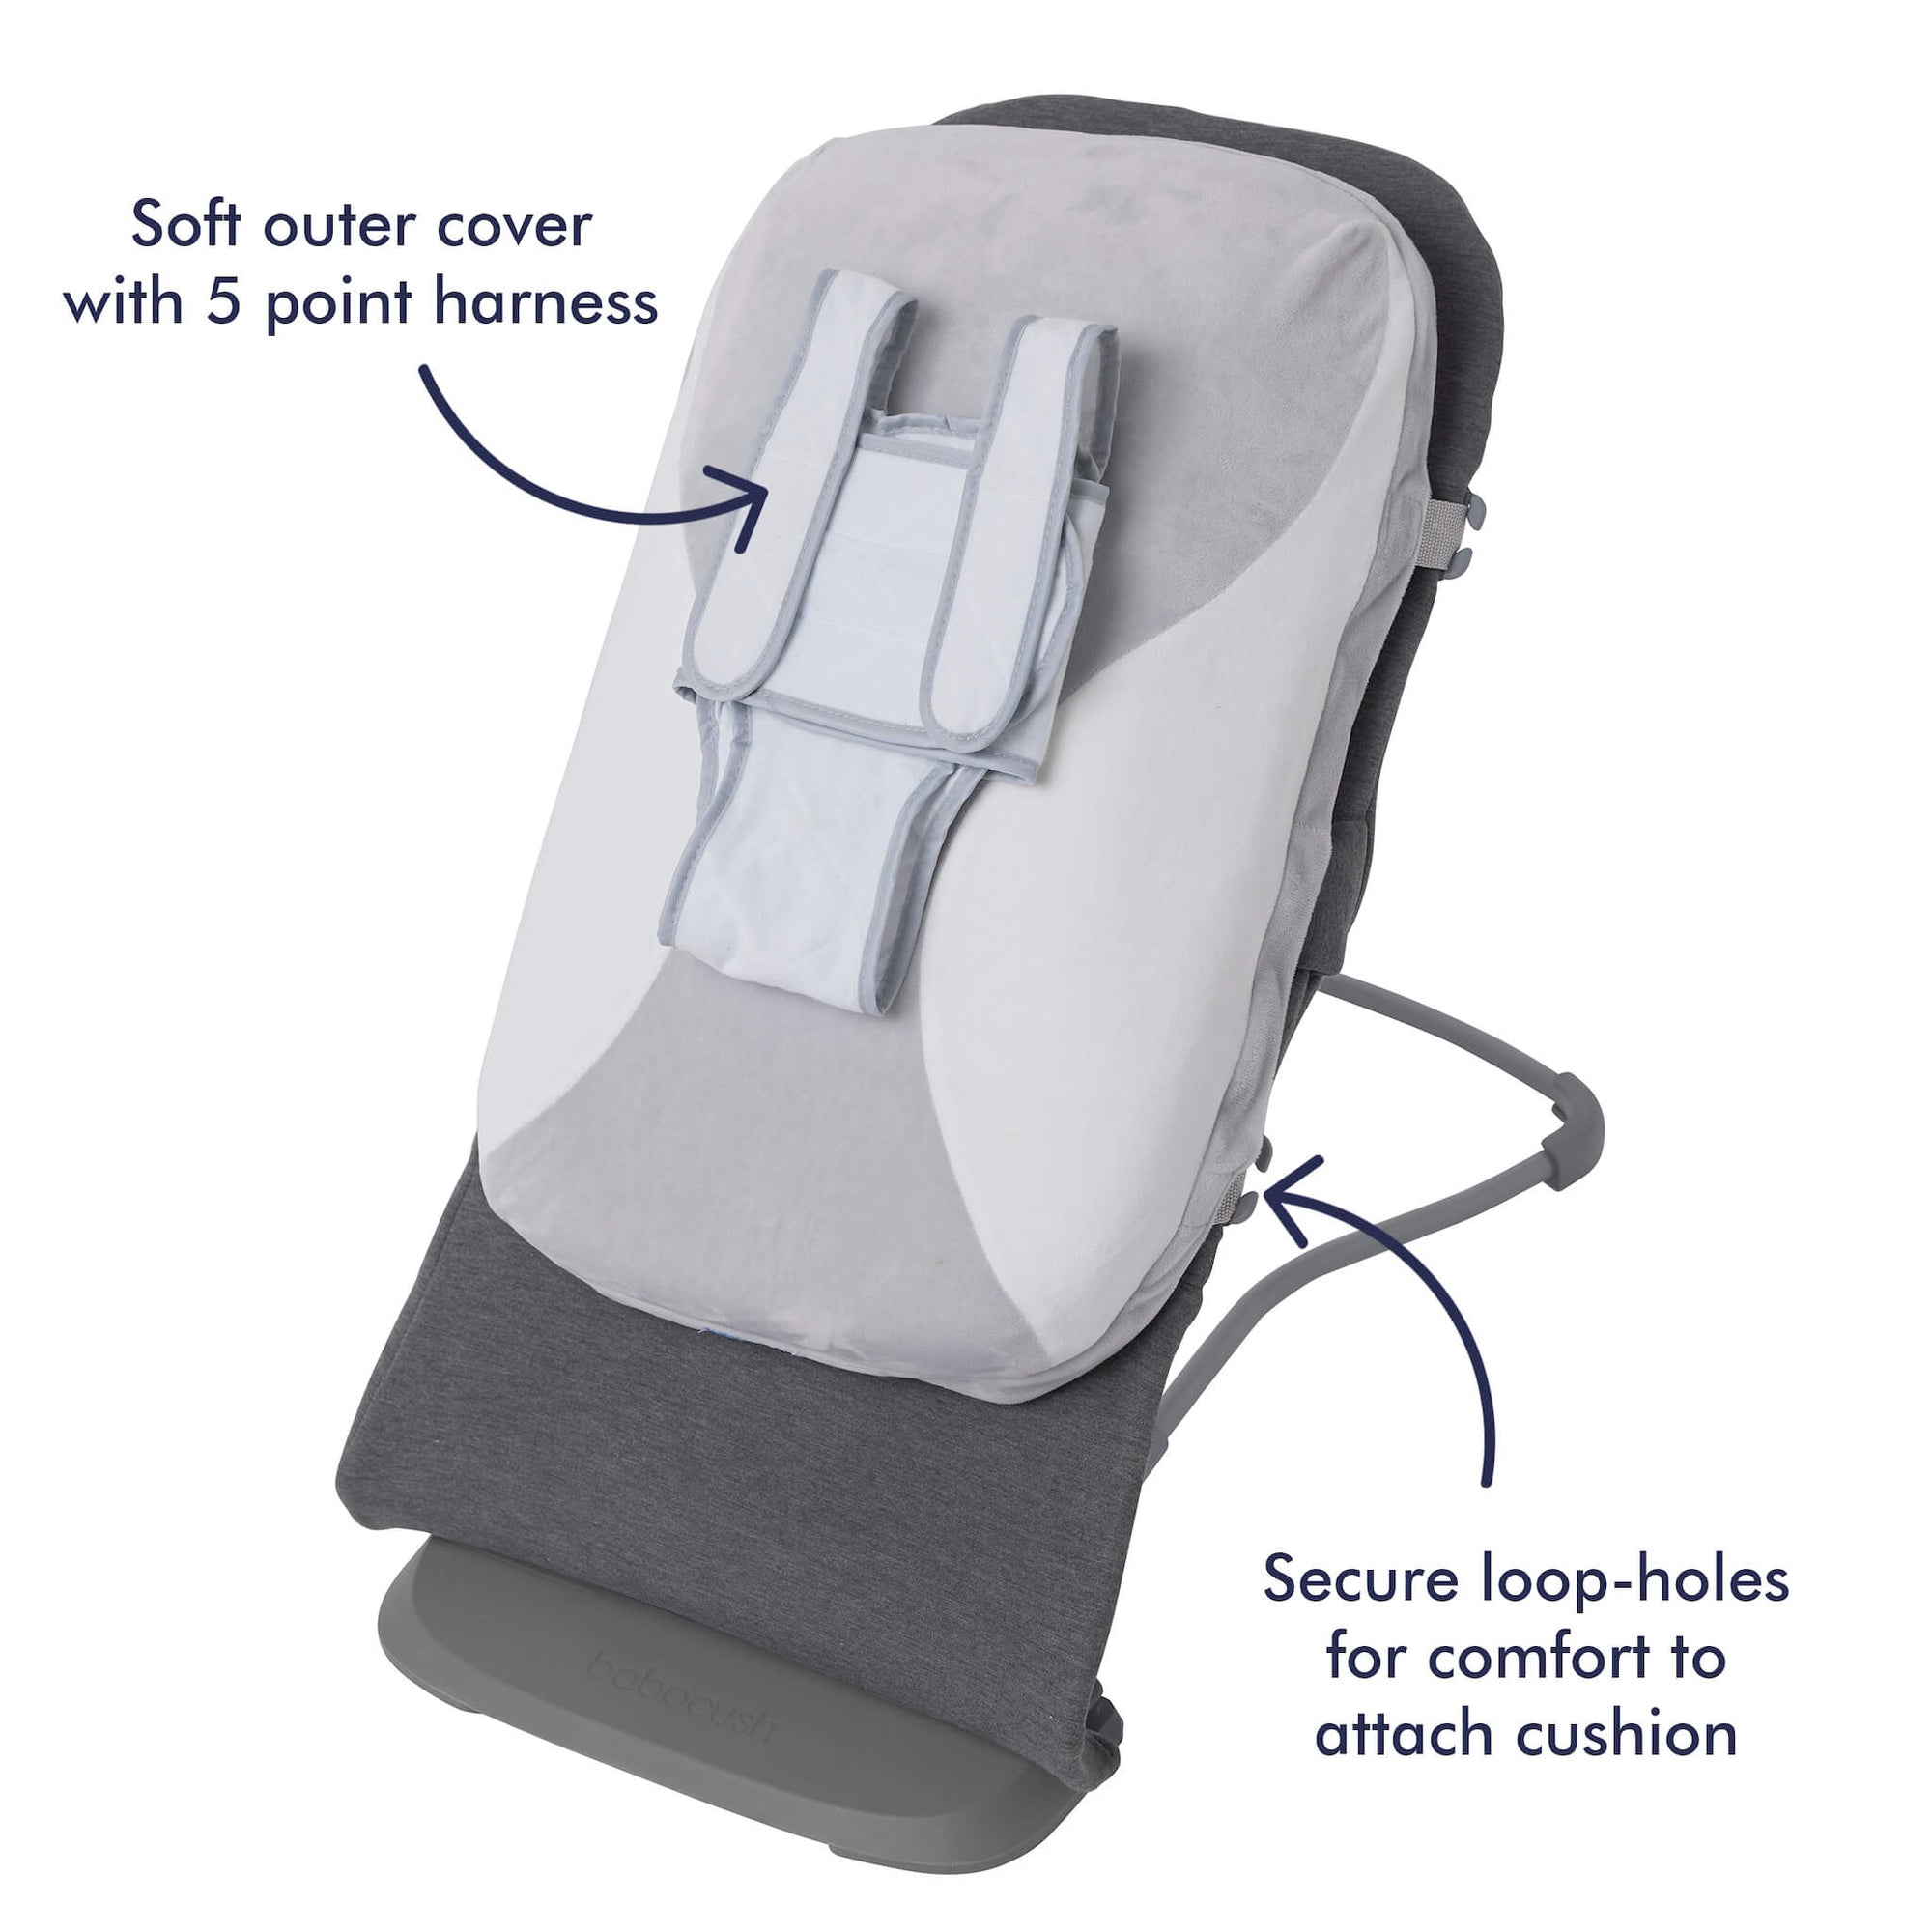 Features of the Babocush cushion and bouncer combo